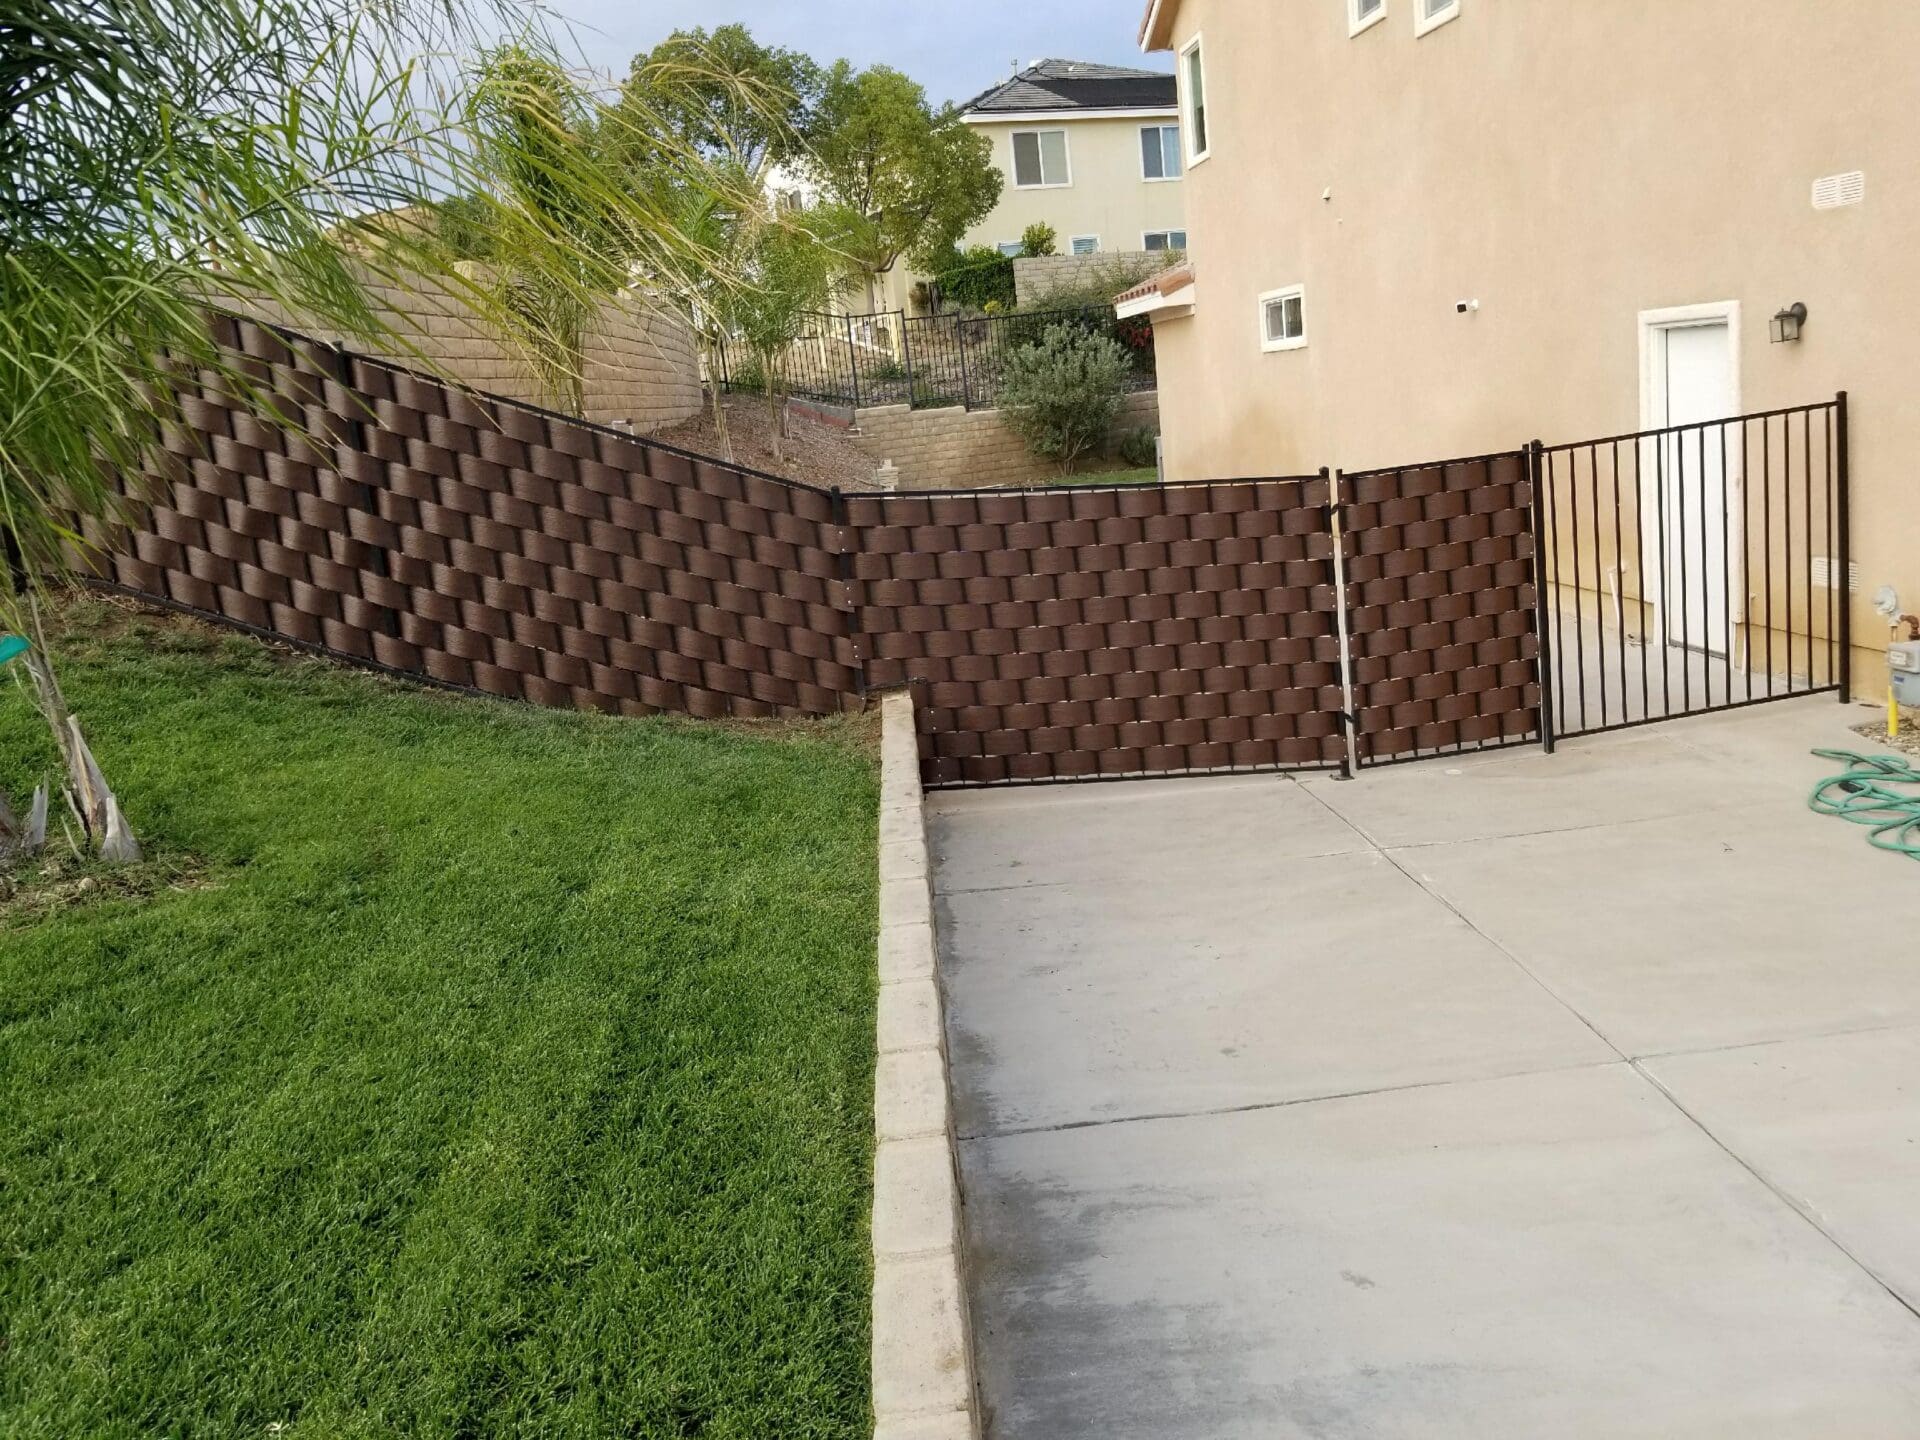 A fence that is in the grass near a house.